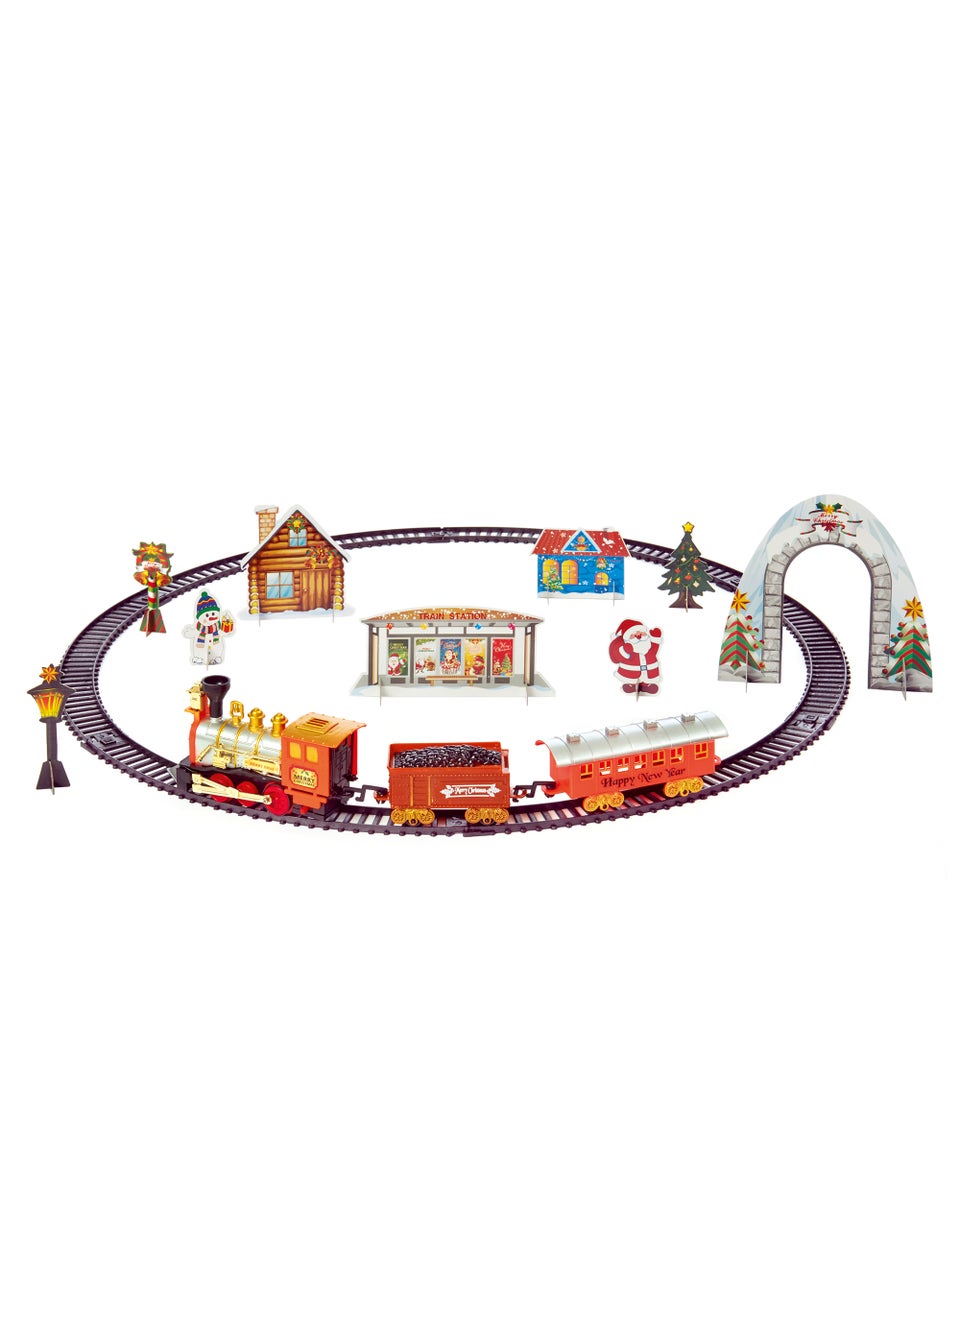 Premier Decorations 11 Piece Battery Operated Train Set with Sound